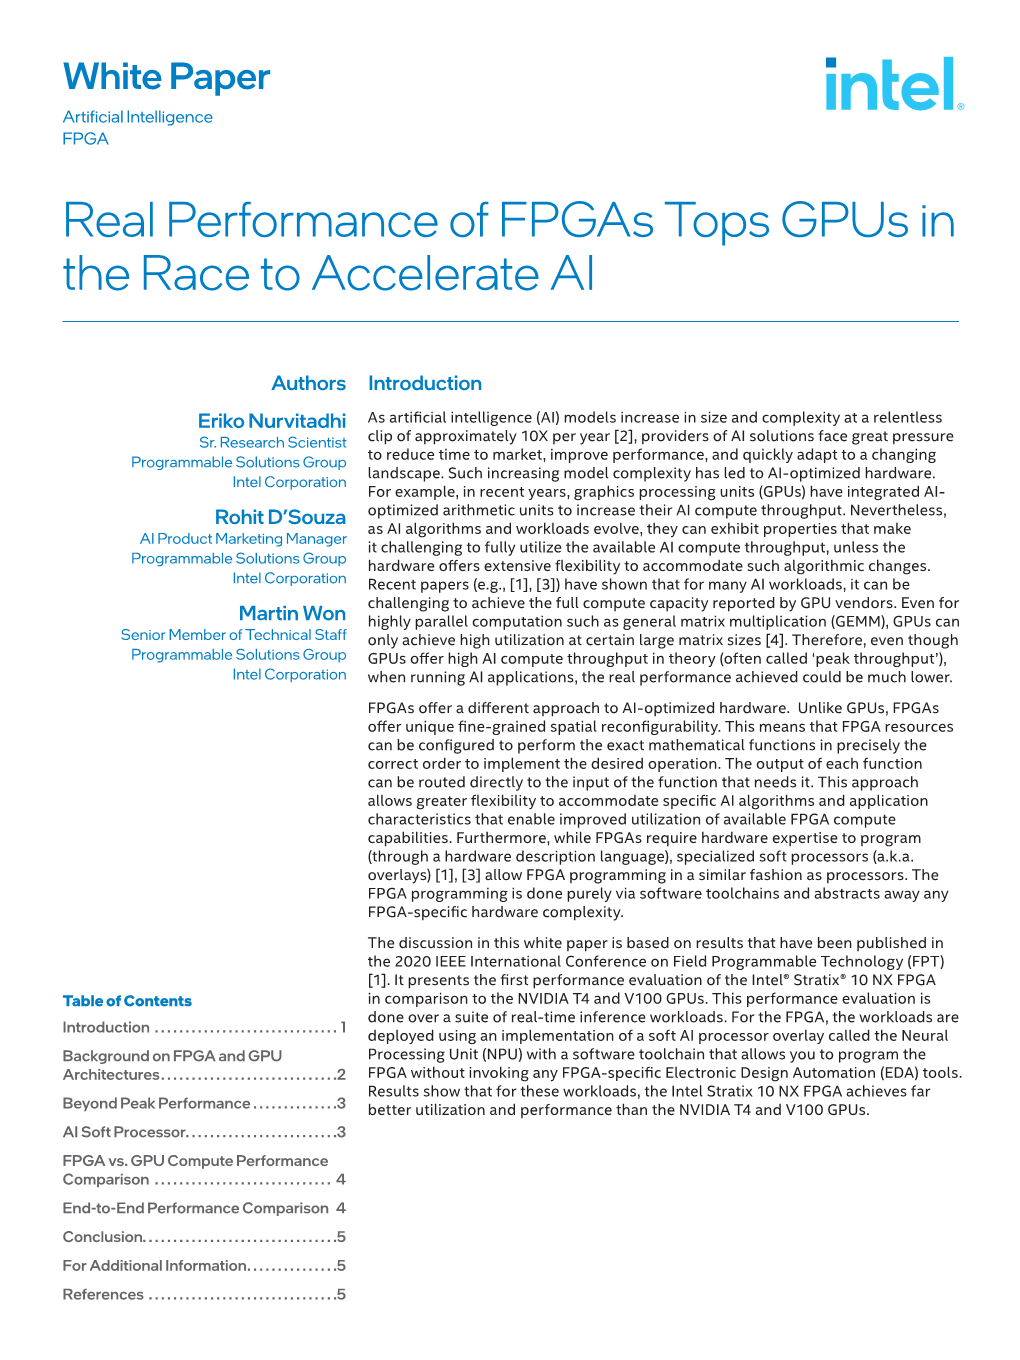 Real Performance of Fpgas Tops Gpus in the Race to Accelerate AI